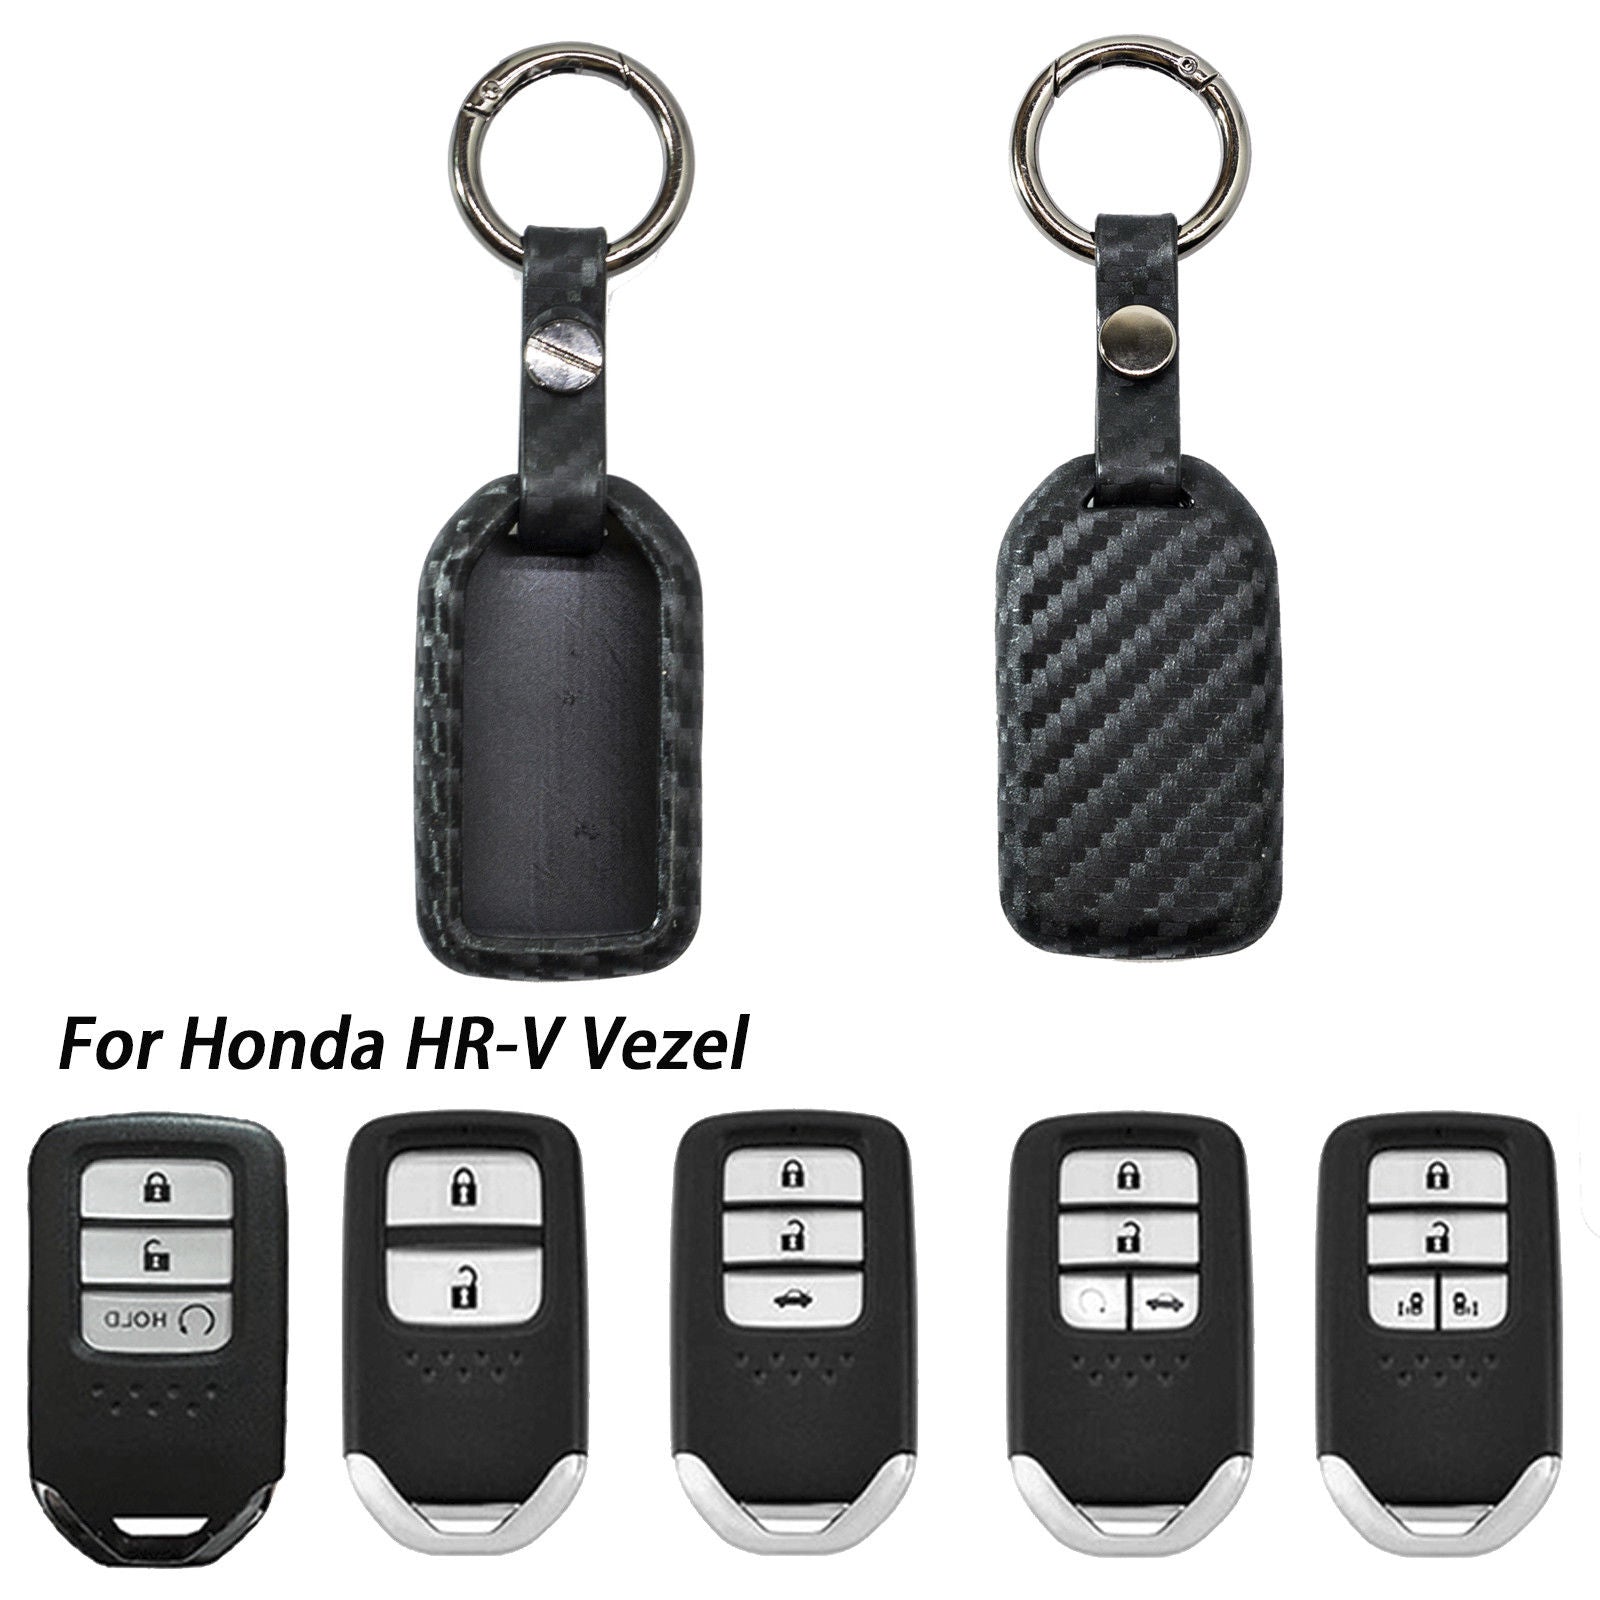 4 Buttons Tpu Car Key Cover Case Shell For Accord 2016 2017 Civic